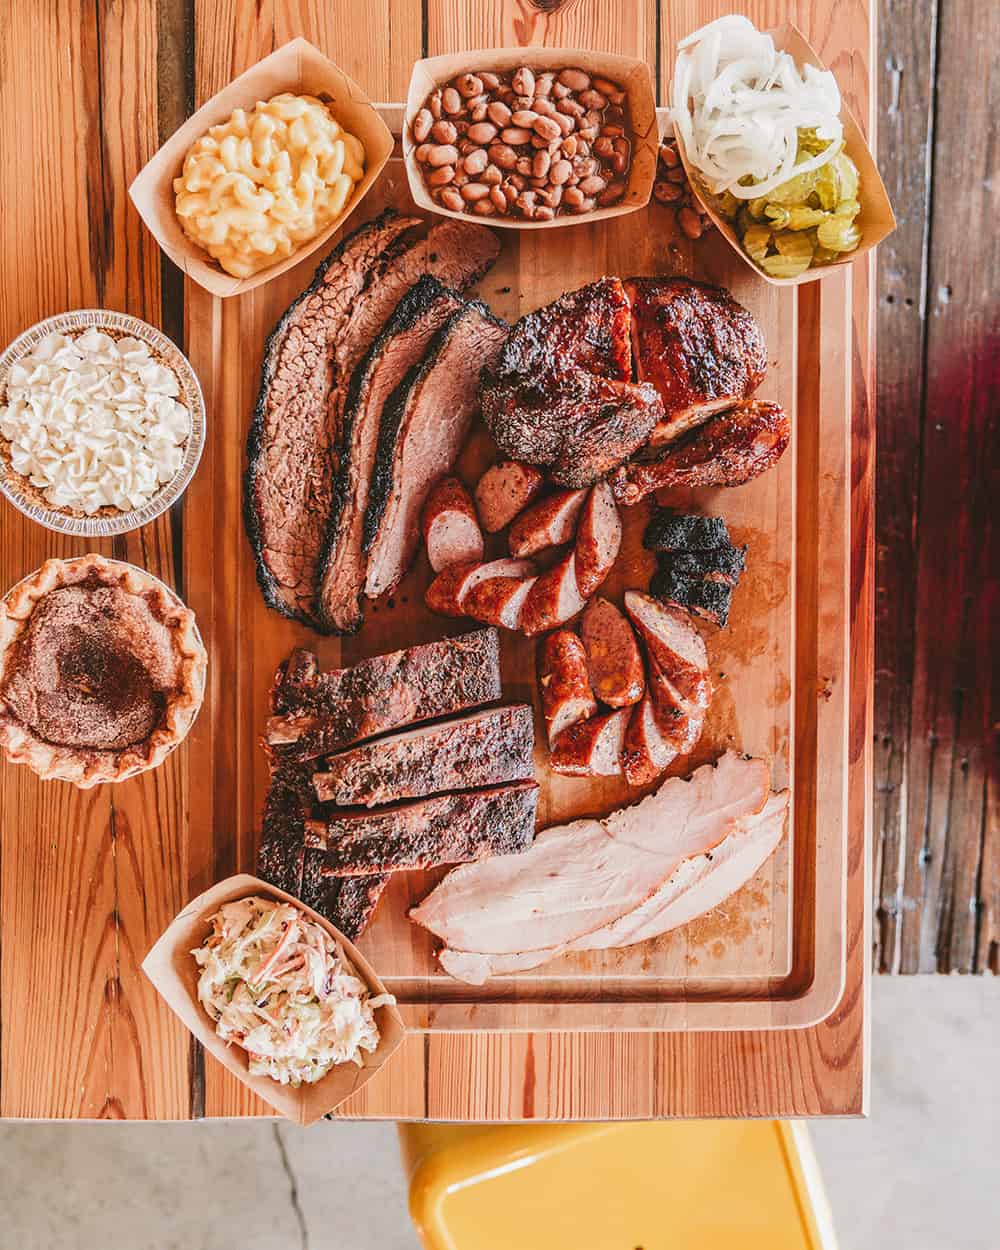 Barbecue at Miller's Smokehouse in Belton Texas